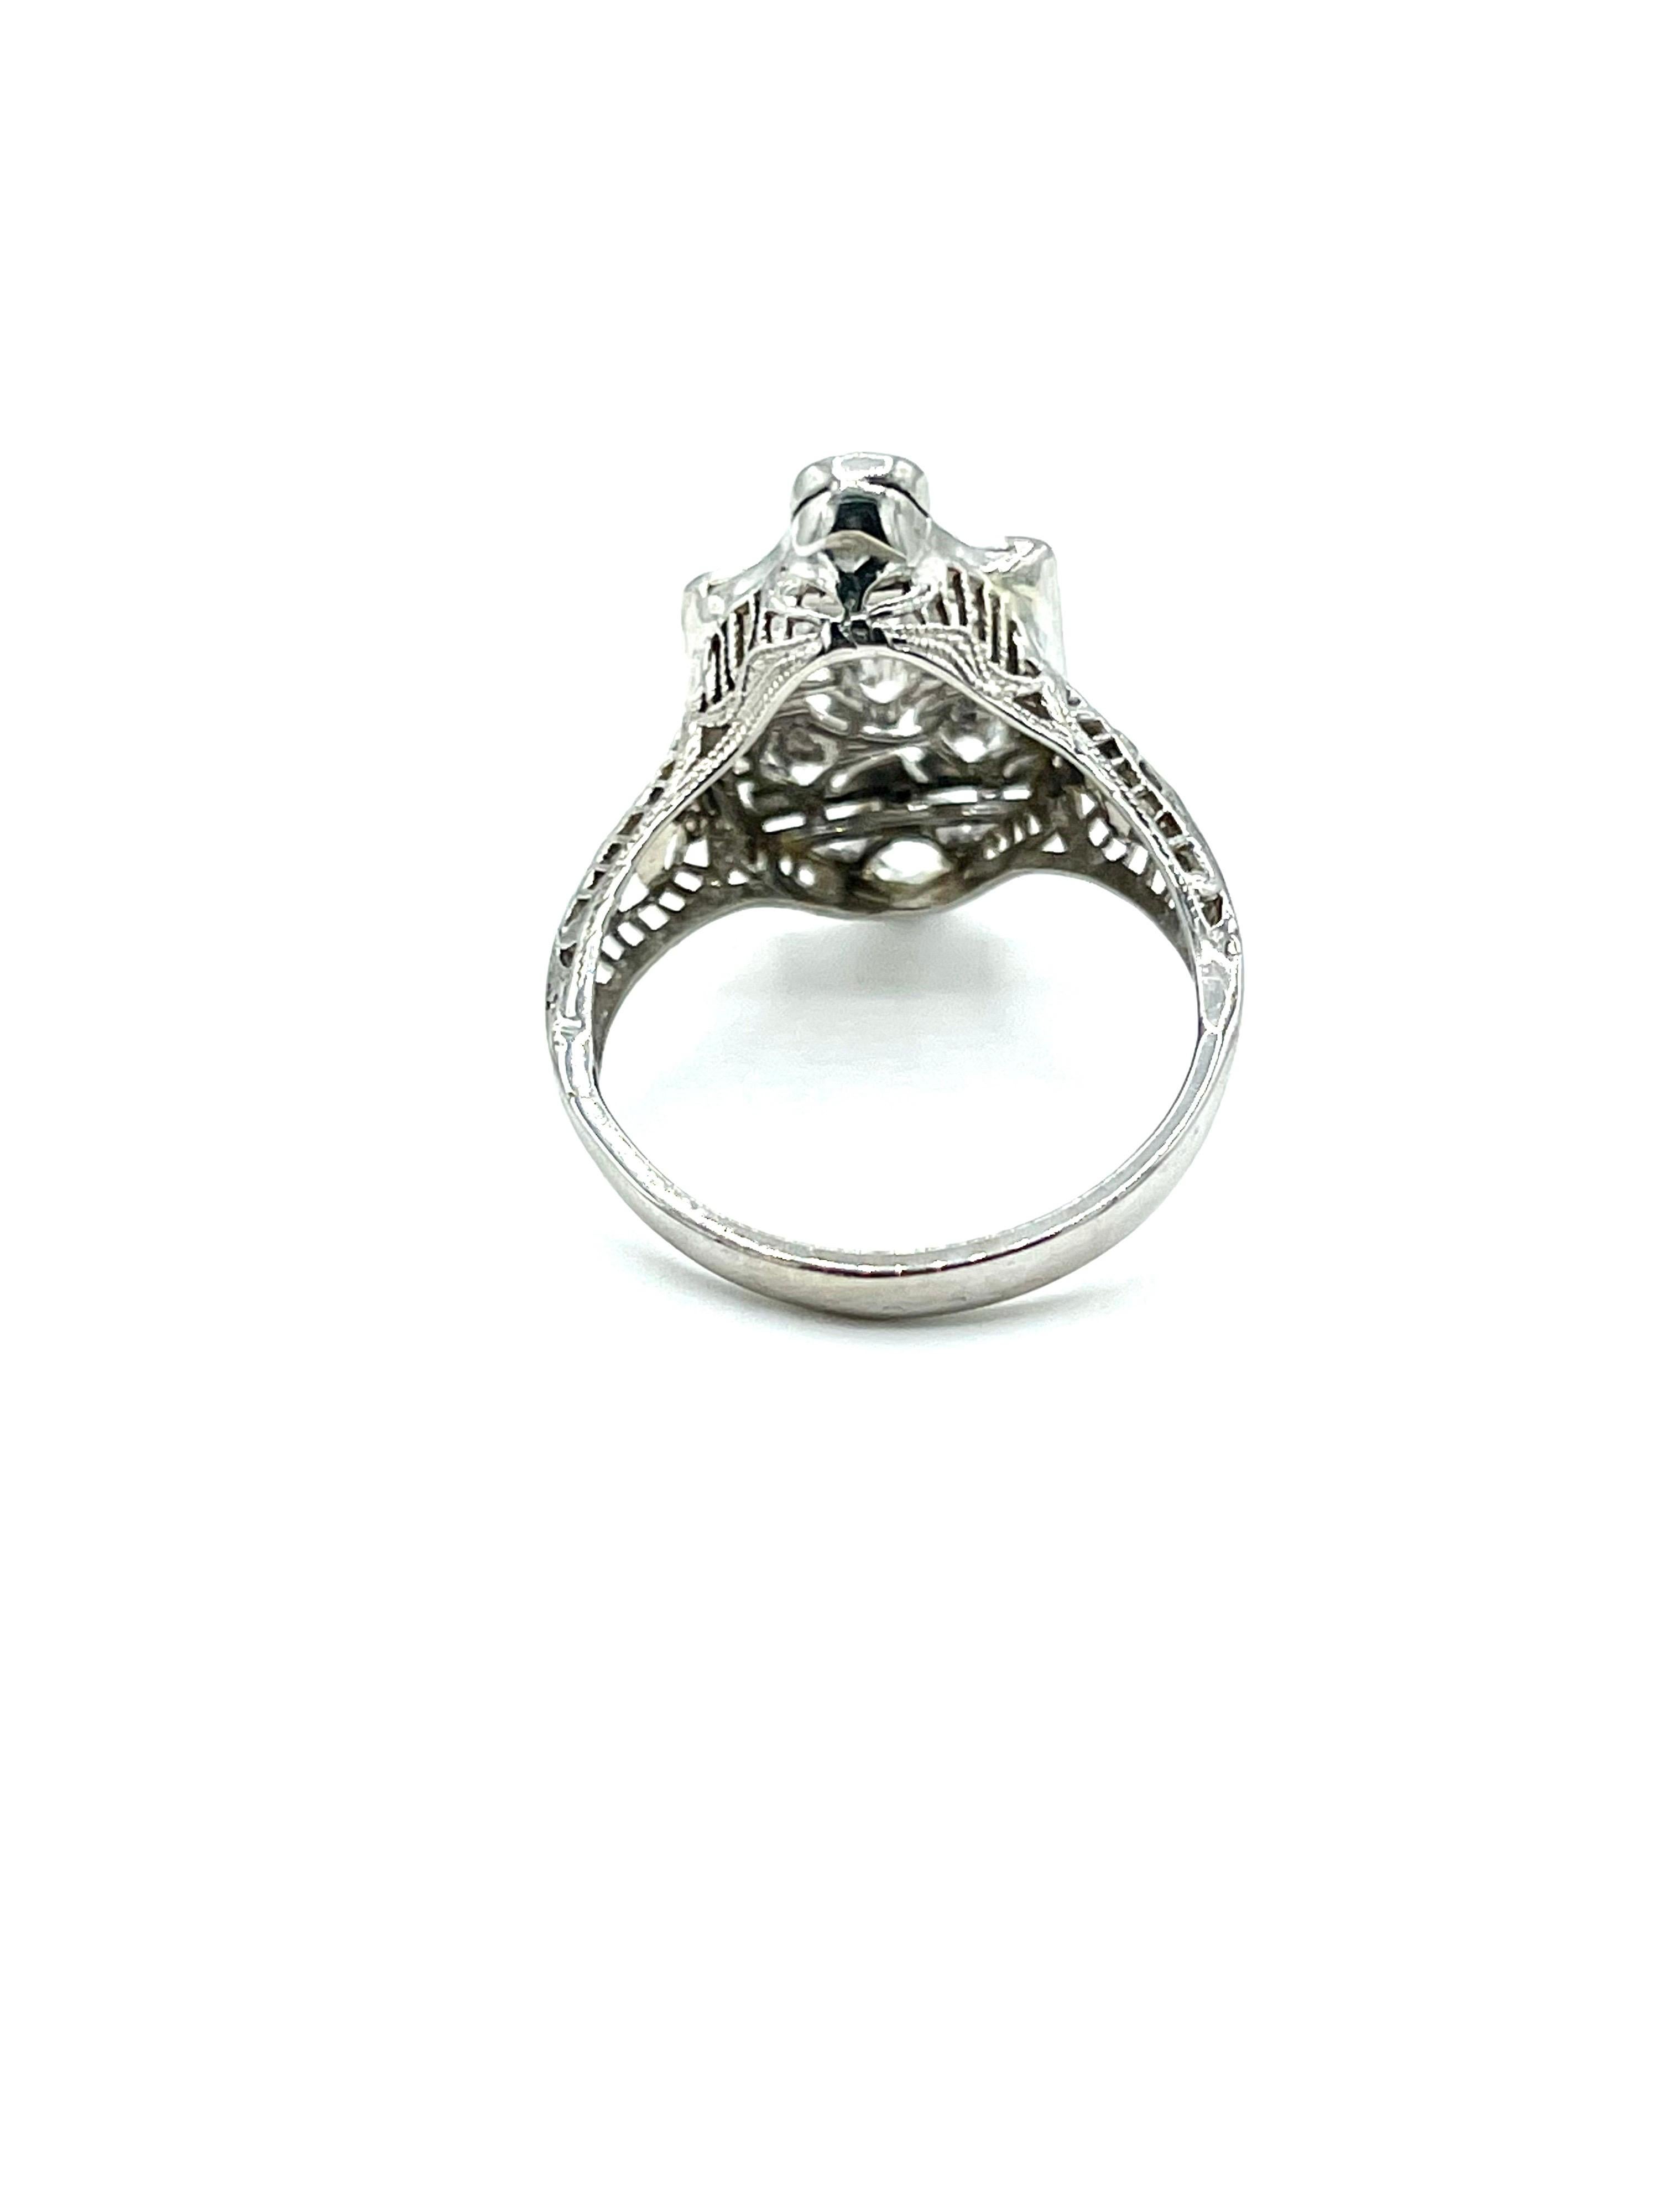 Art Deco Old European Cut Diamond White Gold Cocktail Ring For Sale 1